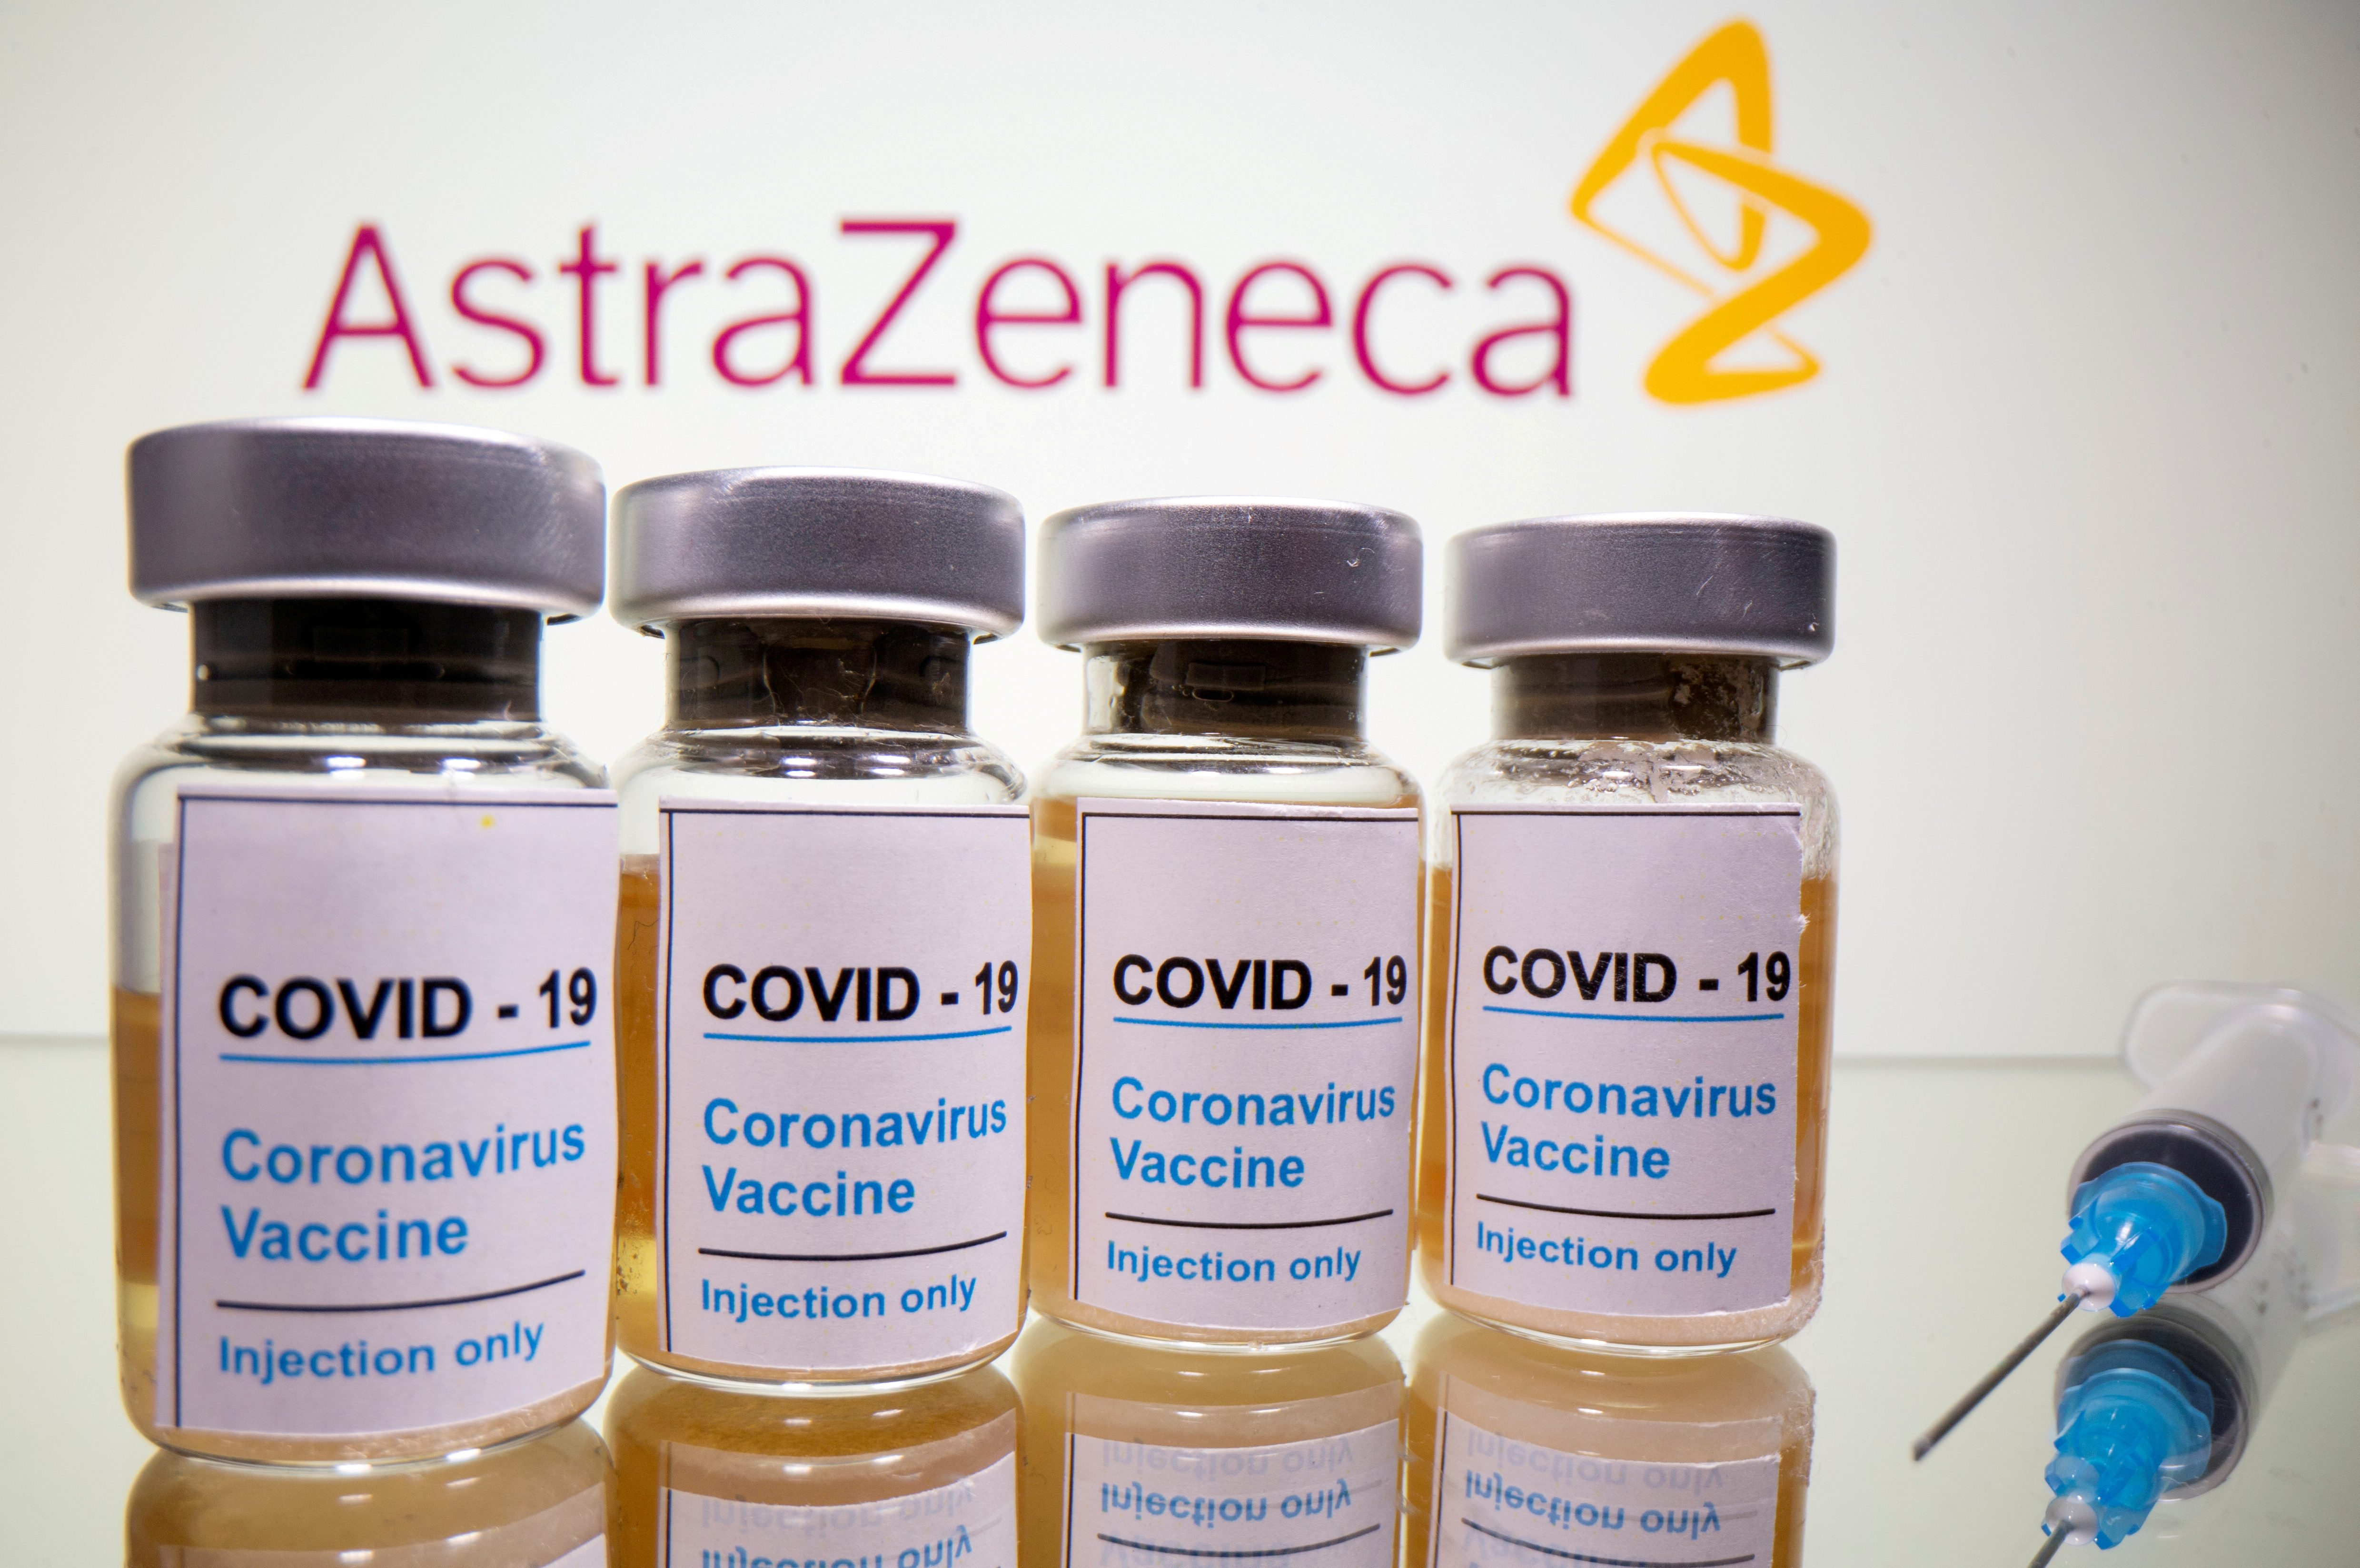 AstraZeneca applies for FDA emergency approval of its COVID-19 vaccine